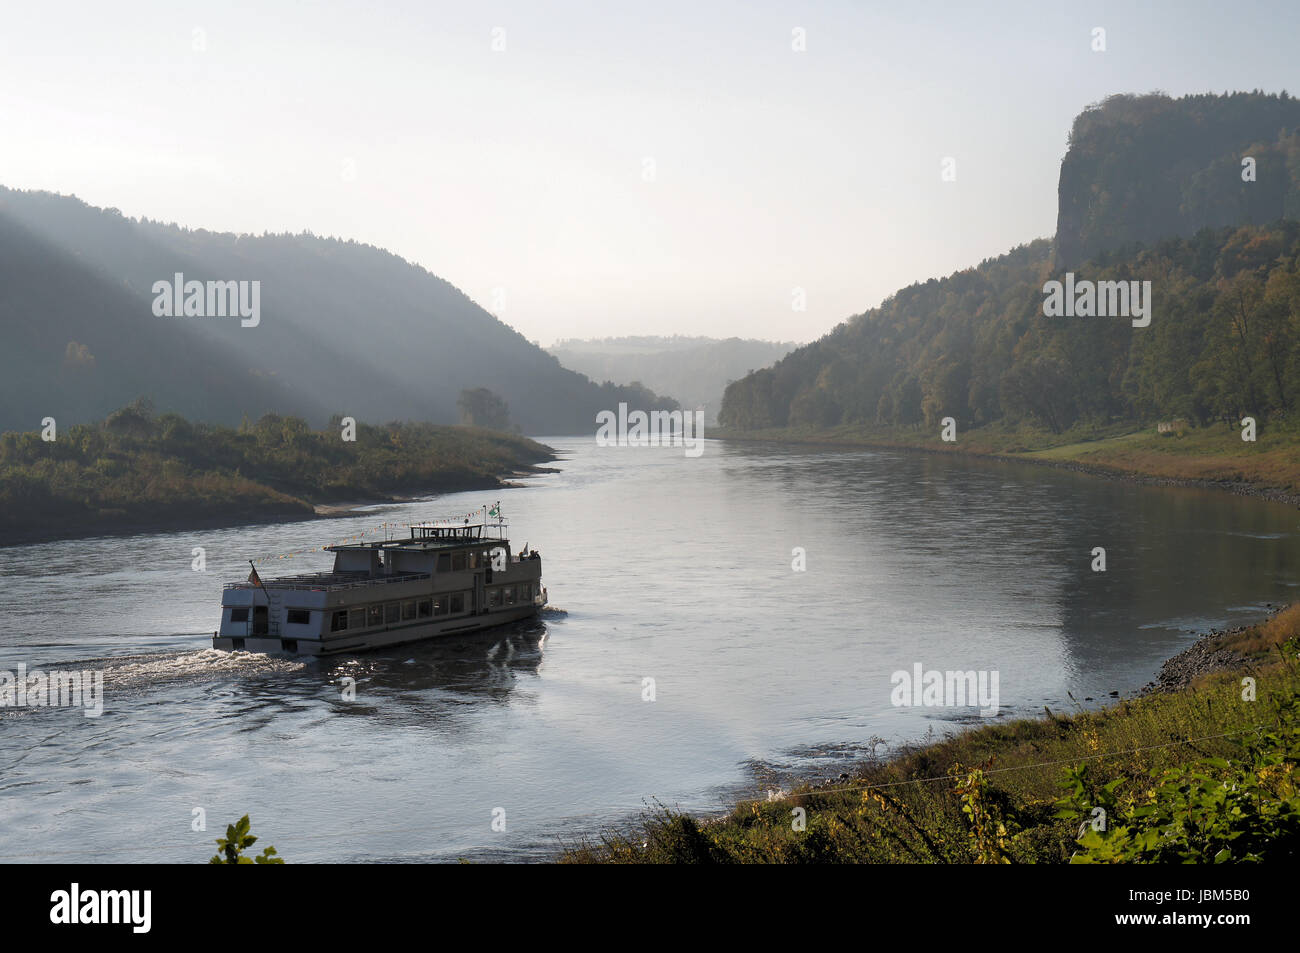 Page 11 - Am Abend High Resolution Stock Photography and Images - Alamy